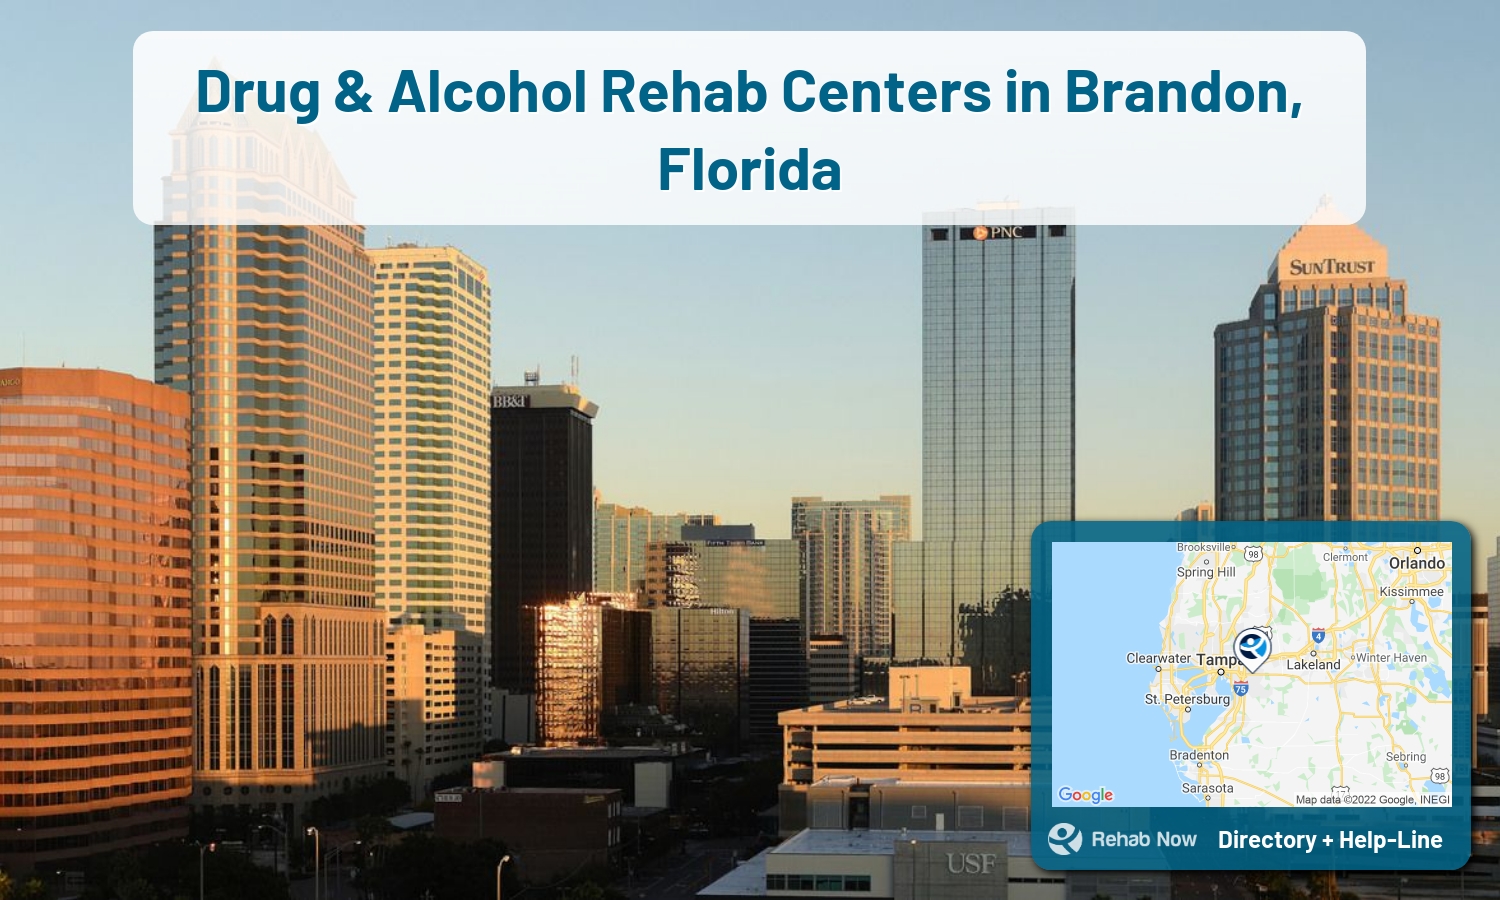 Need treatment nearby in Brandon, Florida? Choose a drug/alcohol rehab center from our list, or call our hotline now for free help.